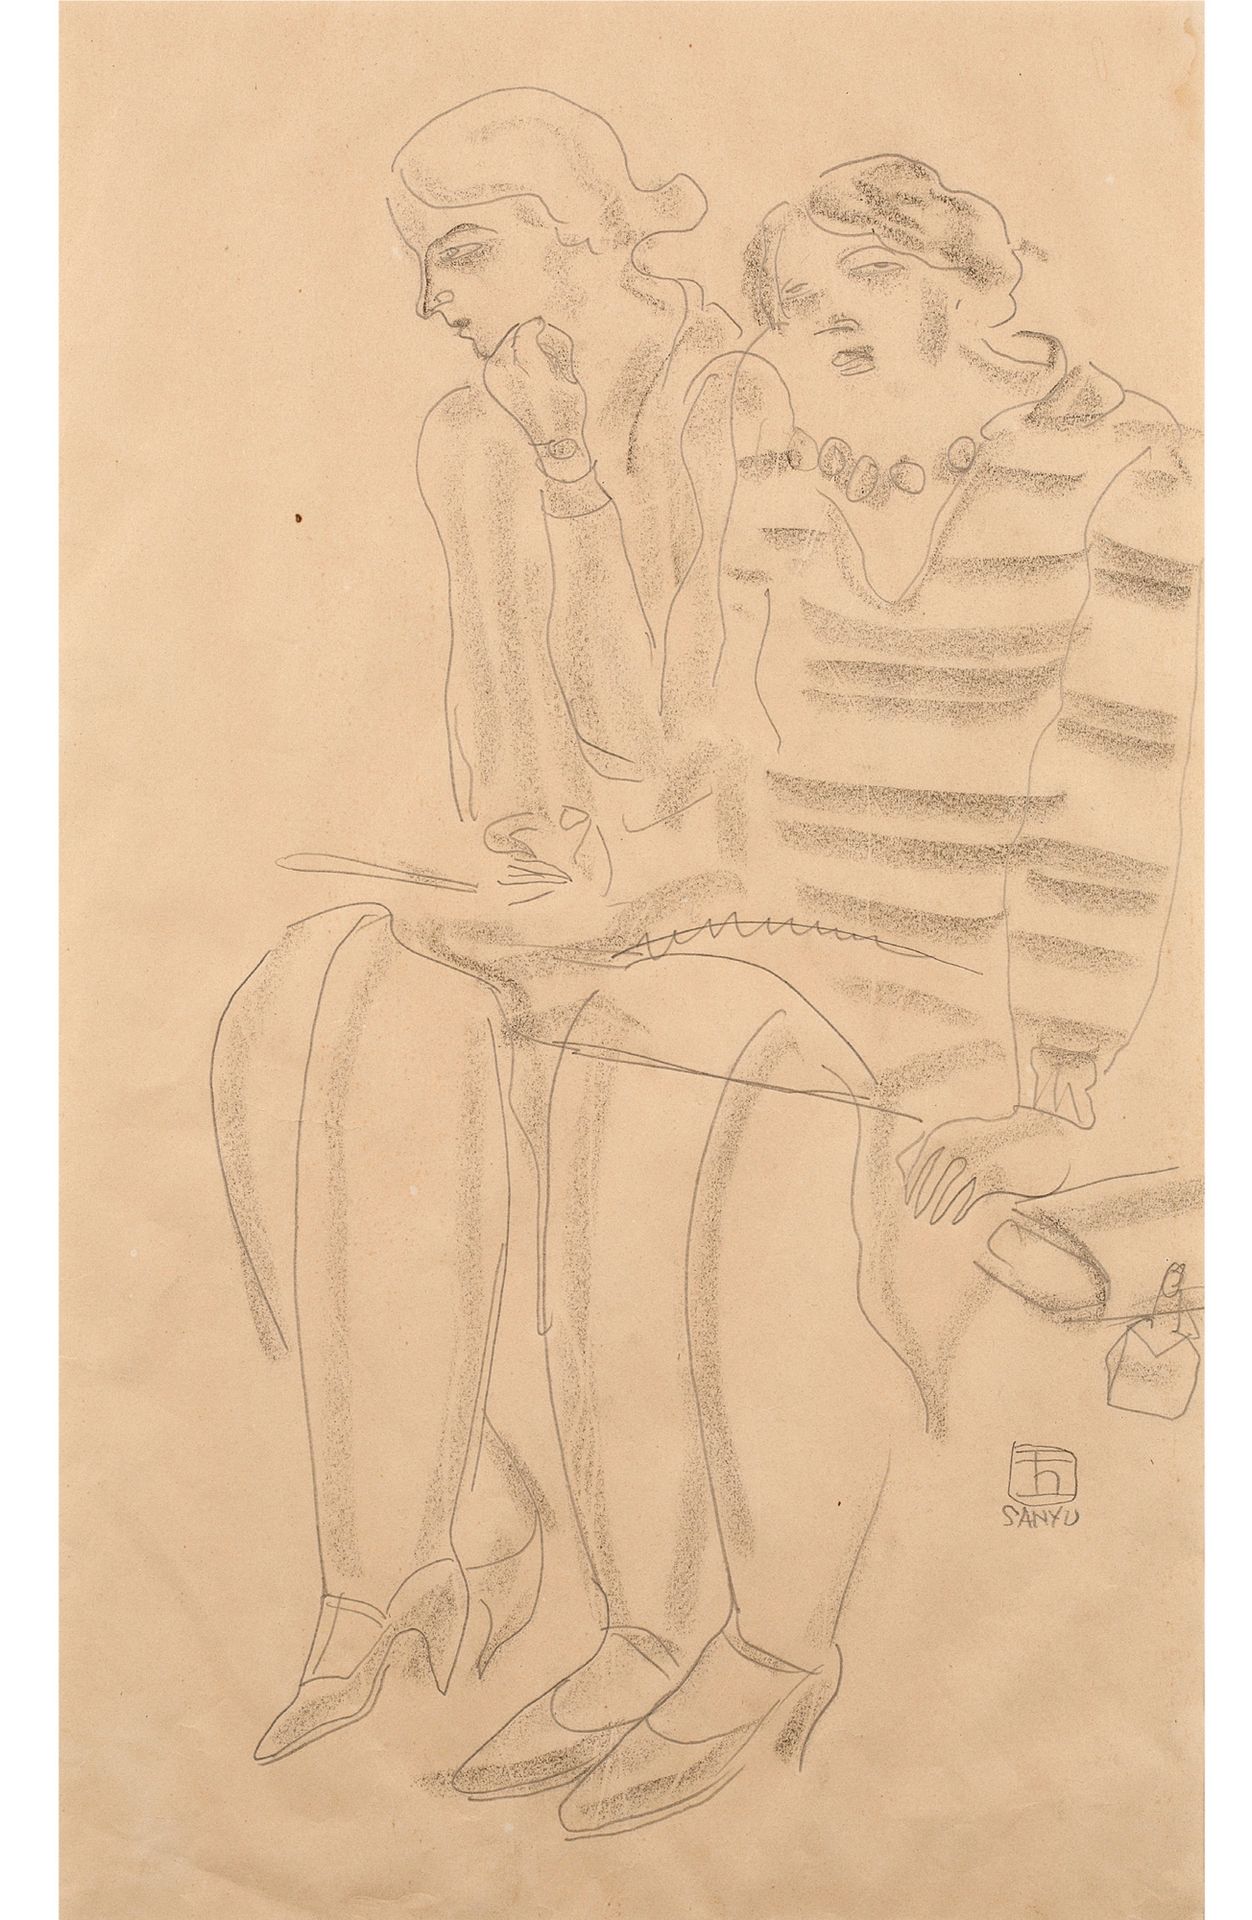 SANYU (1895-1966) 
Deux femmes assises

Pencil on paper, signed lower right

41.&hellip;